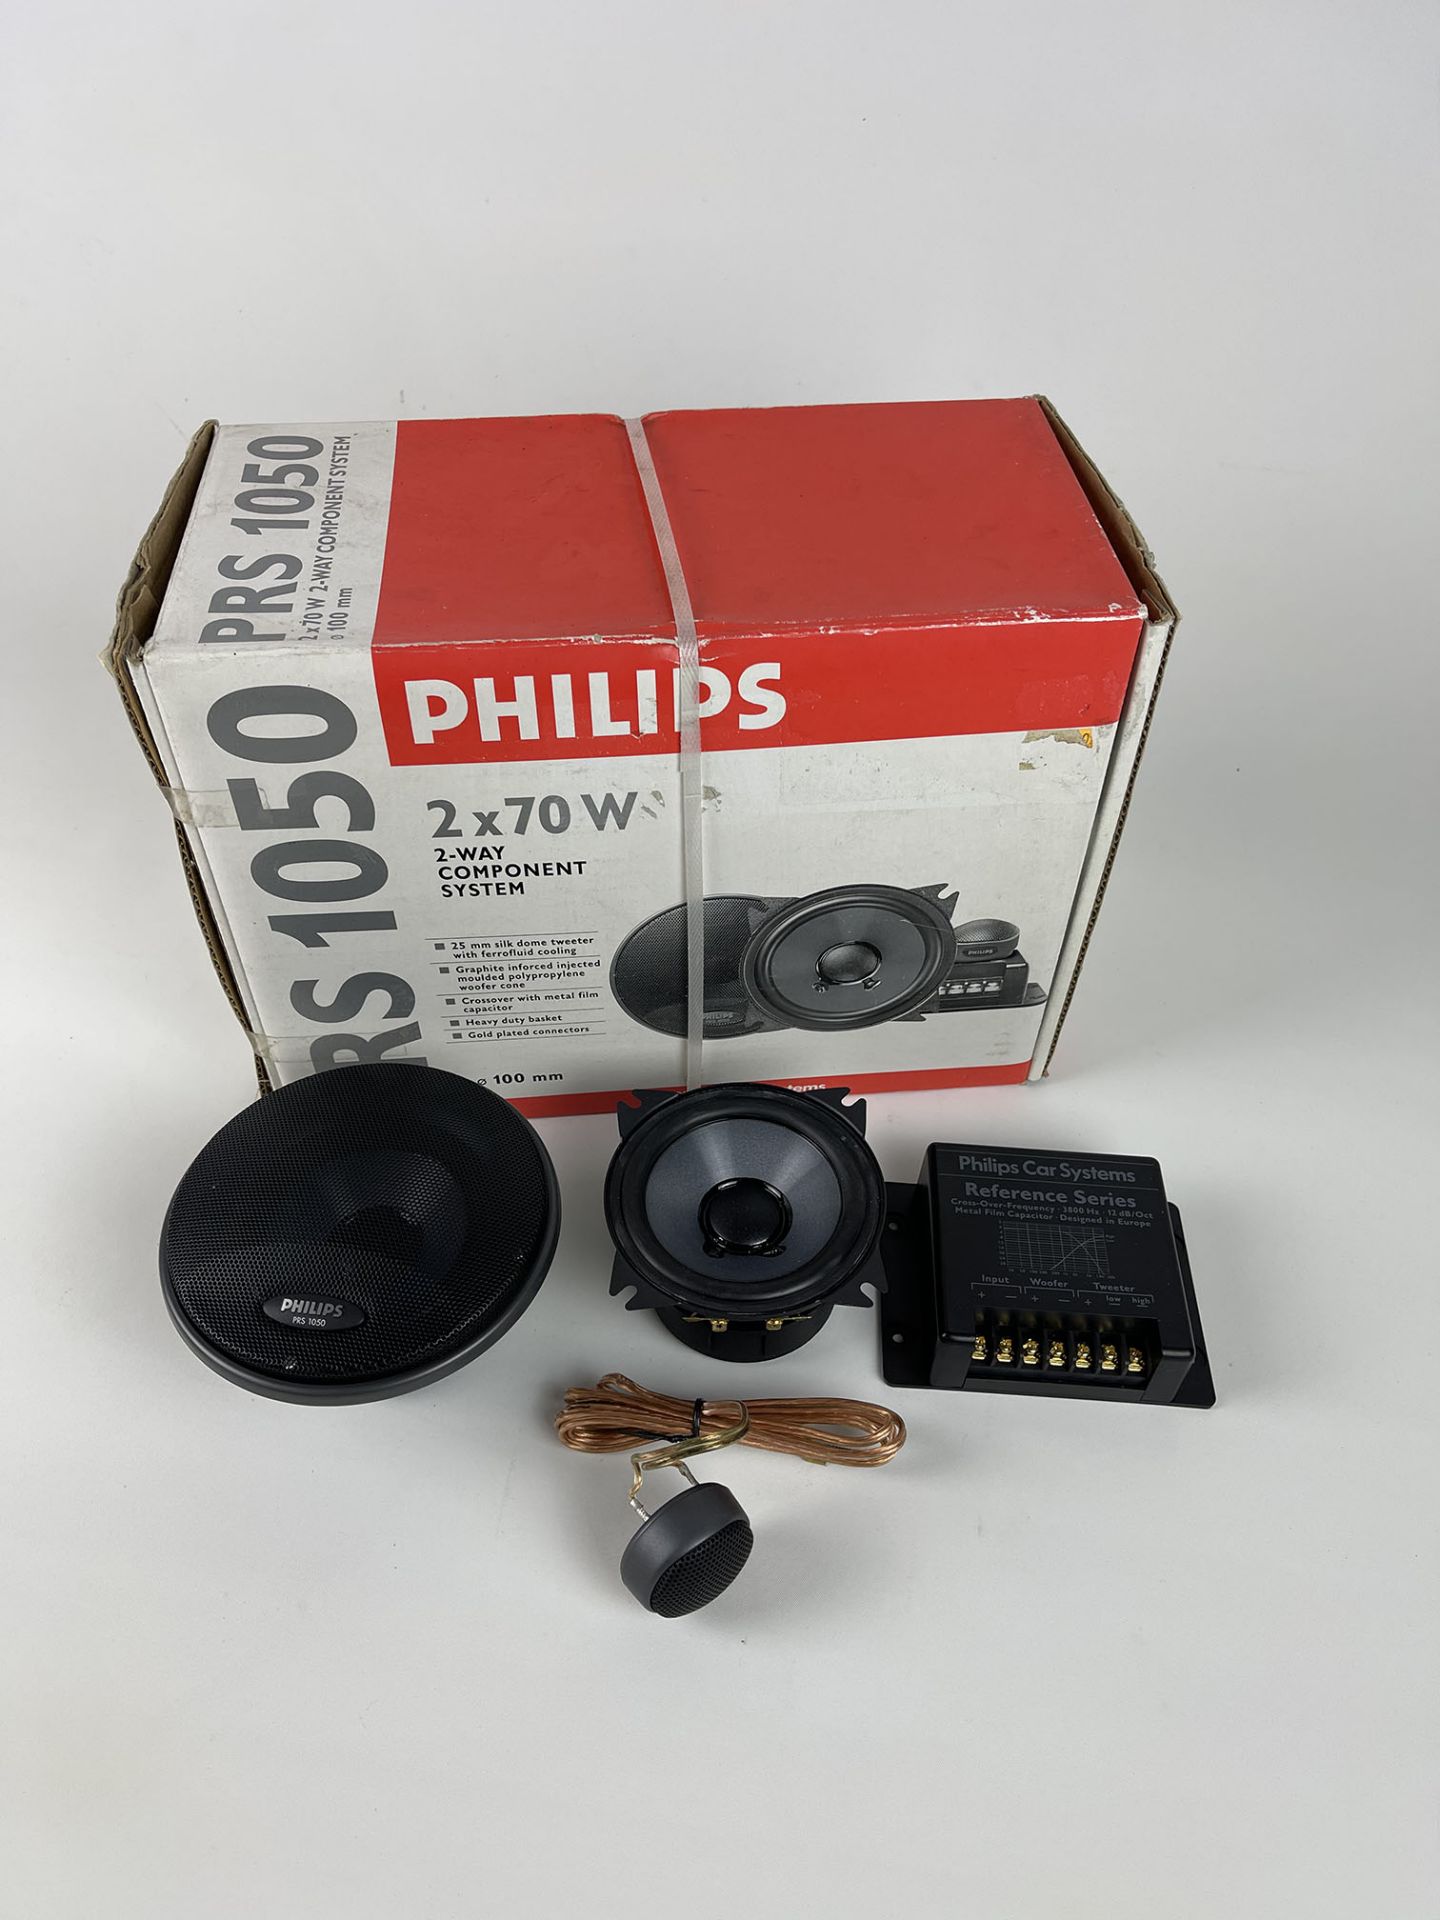 New Old Stock Philips PRS 1050 70W Car Speakers - Image 3 of 3